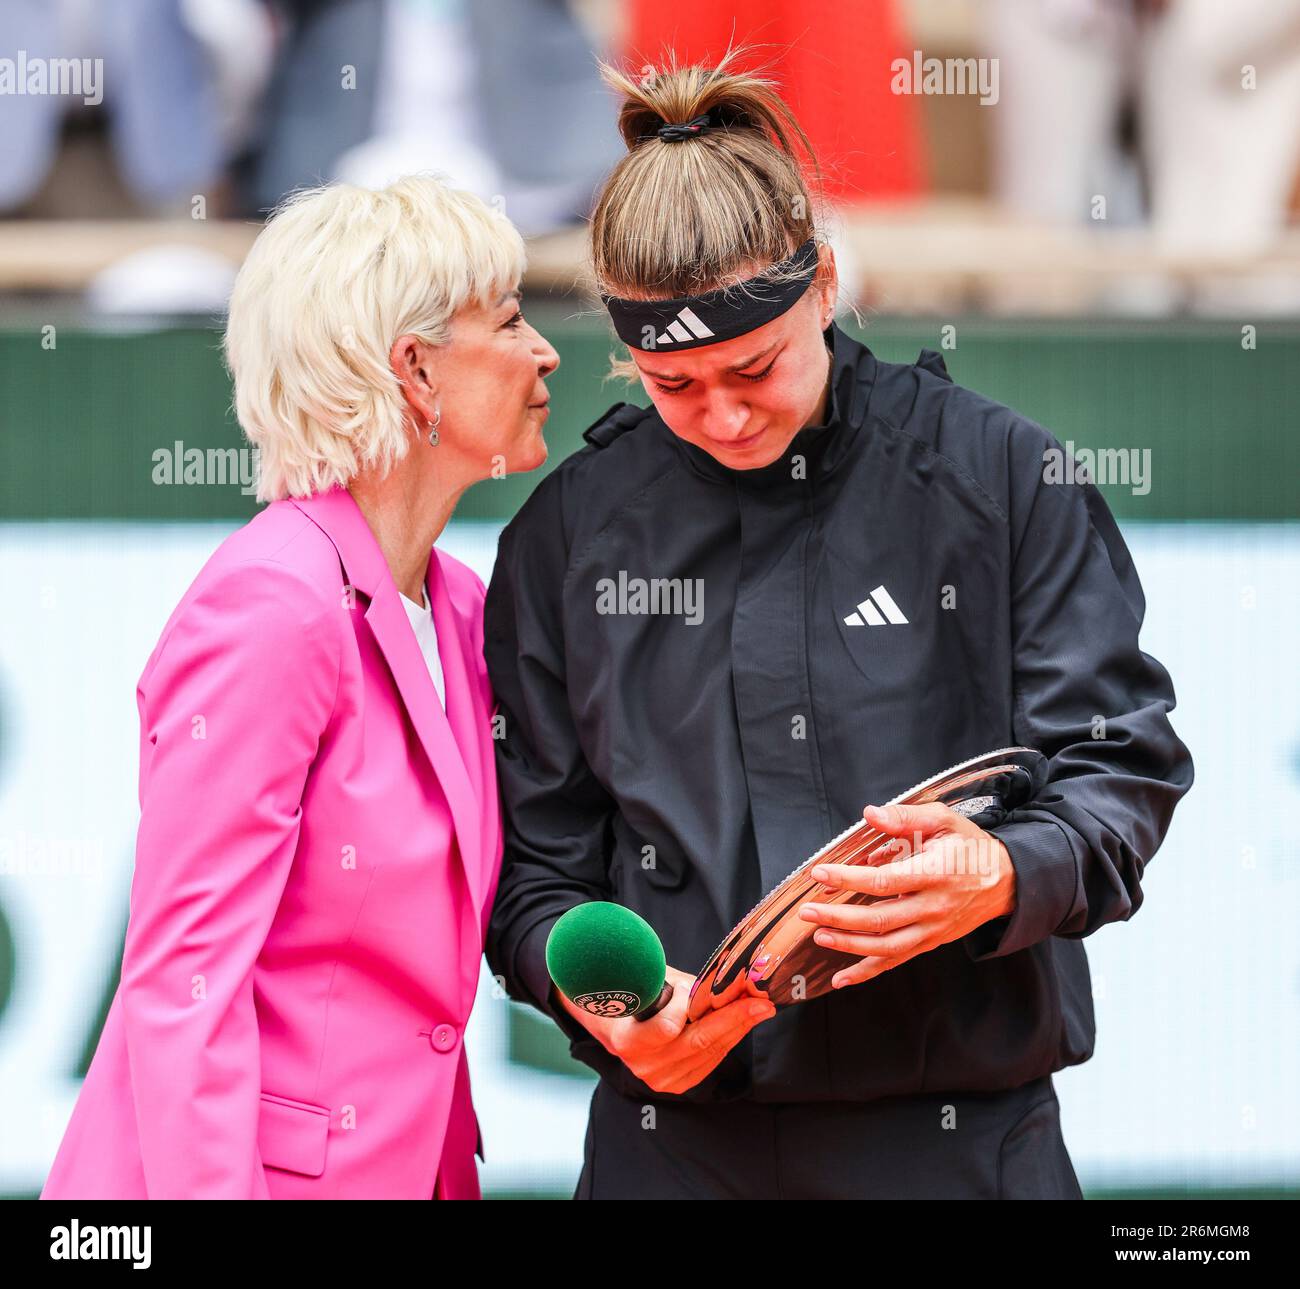 Paris, France. 10th June, 2023. Tennis player Karolina Muchova (CZE) and Chris Evert at the 2023 French Open Grand Slam tennis tournament in Roland Garros, Paris, France. Frank Molter/Alamy Live news Stock Photo